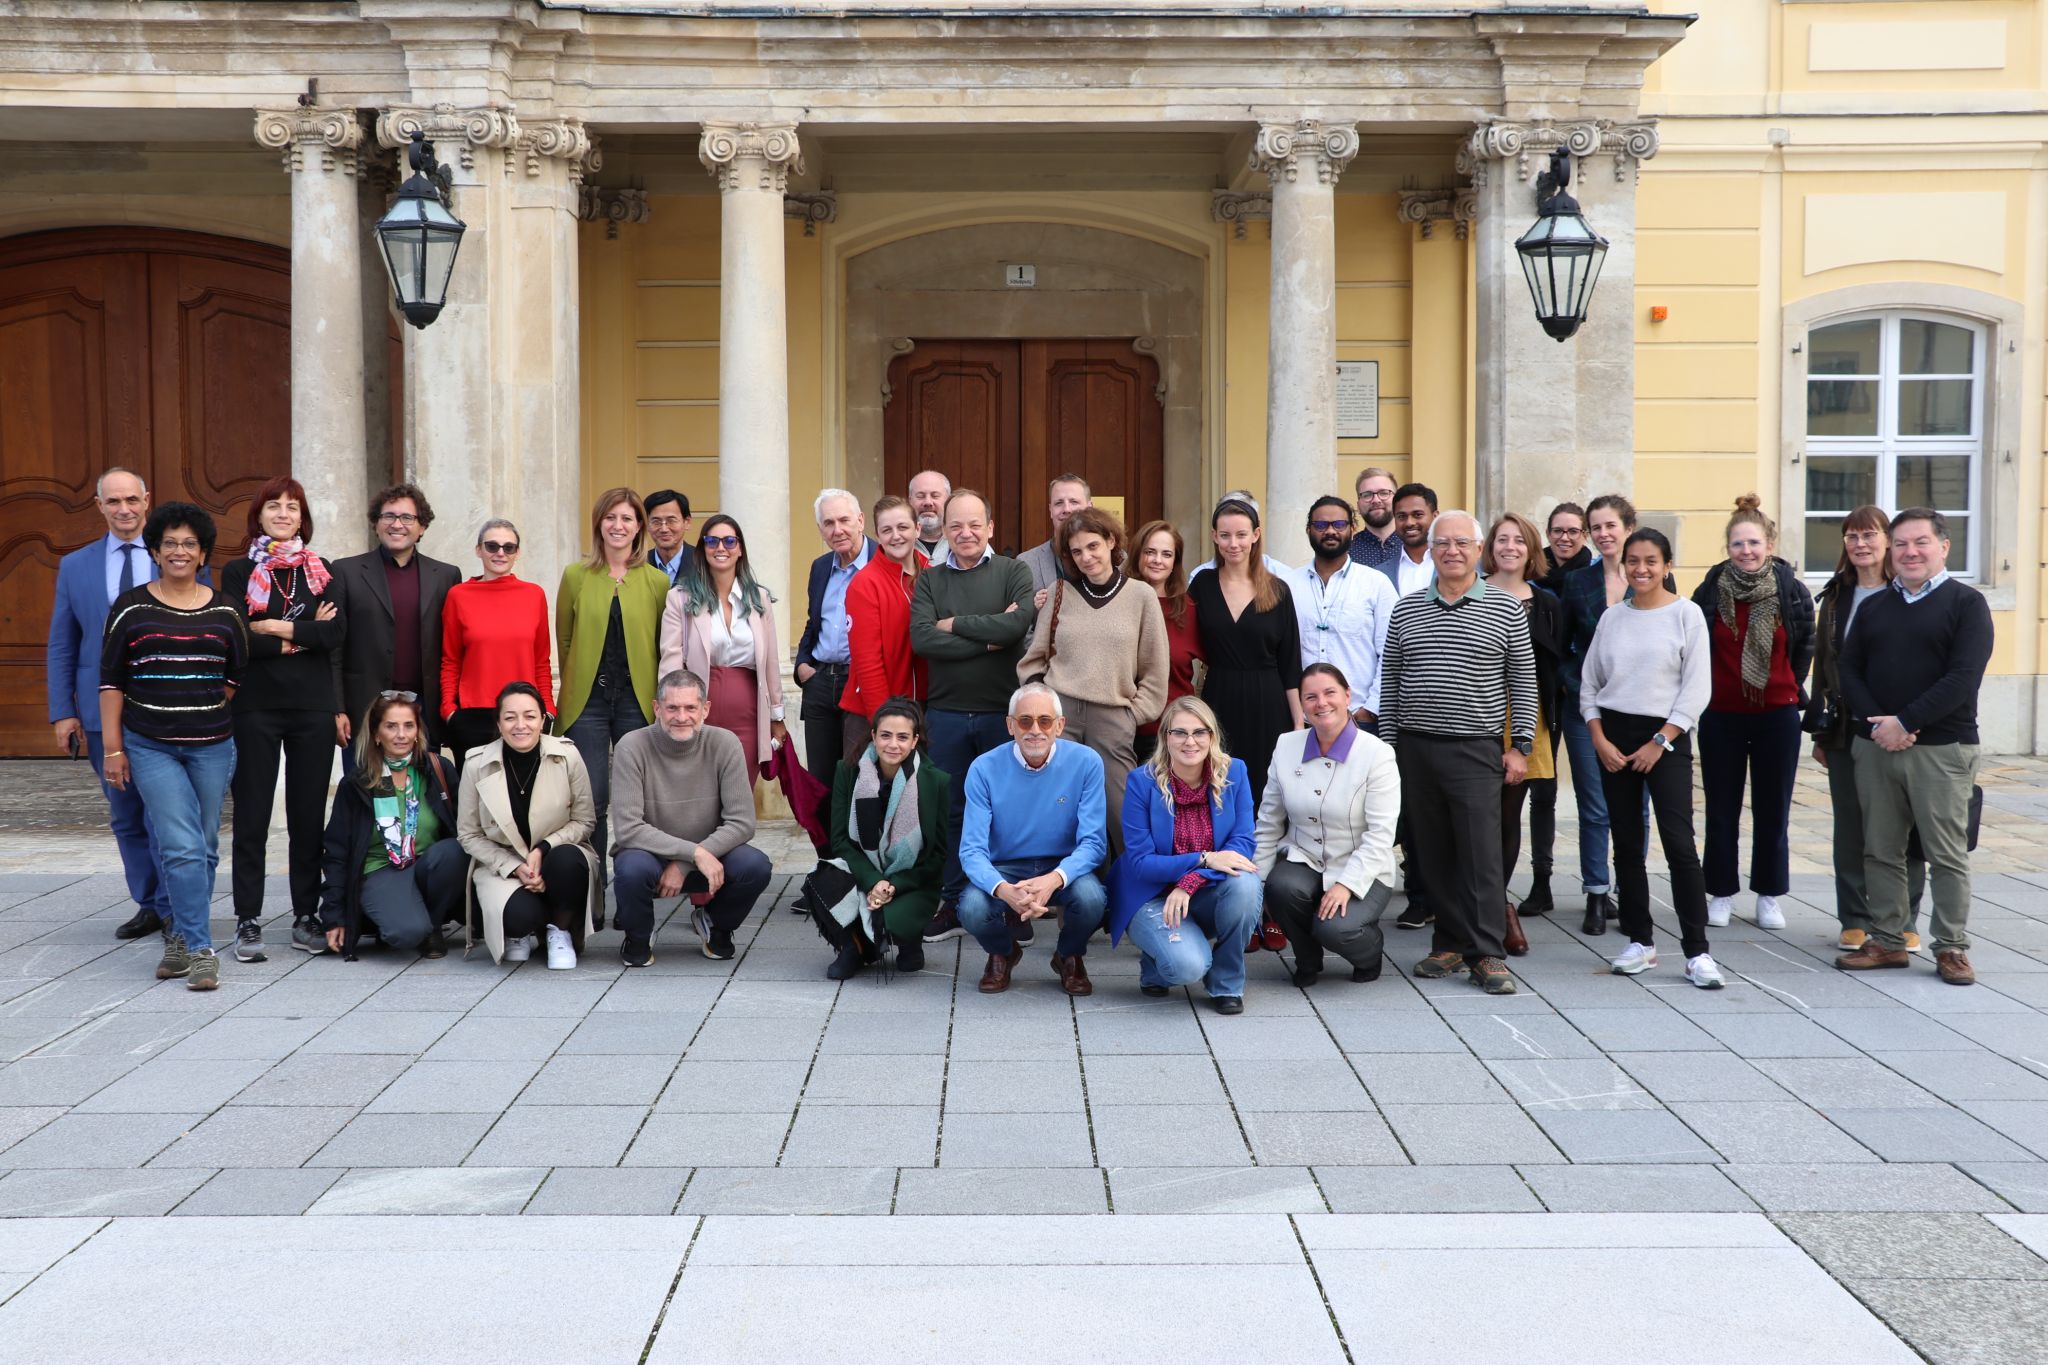 🚀 CORE held its 2d GENERAL ASSEMBLY in Laxenburg (Austria) - September 29 & 30 🚀